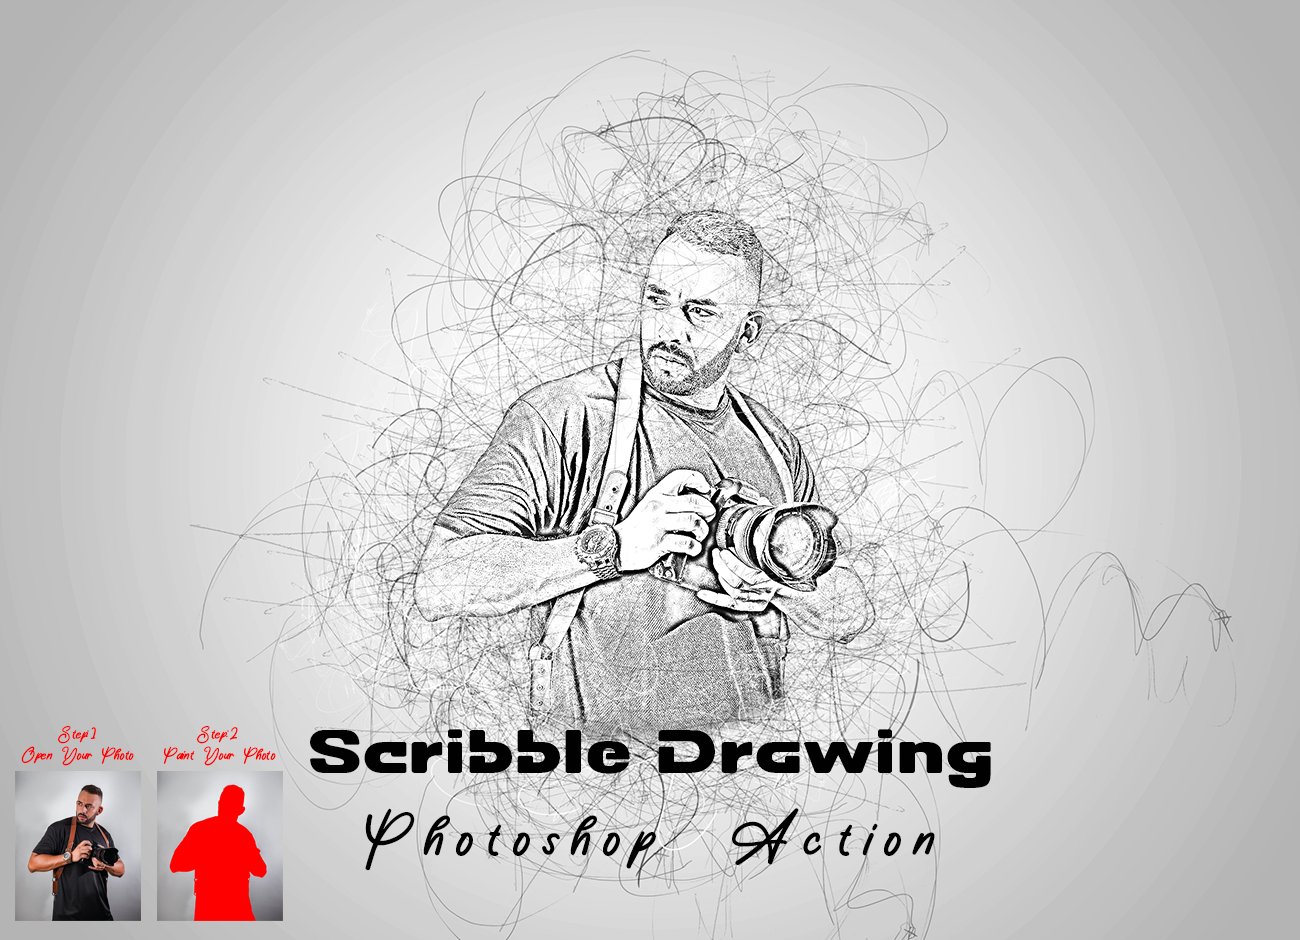 Scribble Drawing Photoshop Actioncover image.